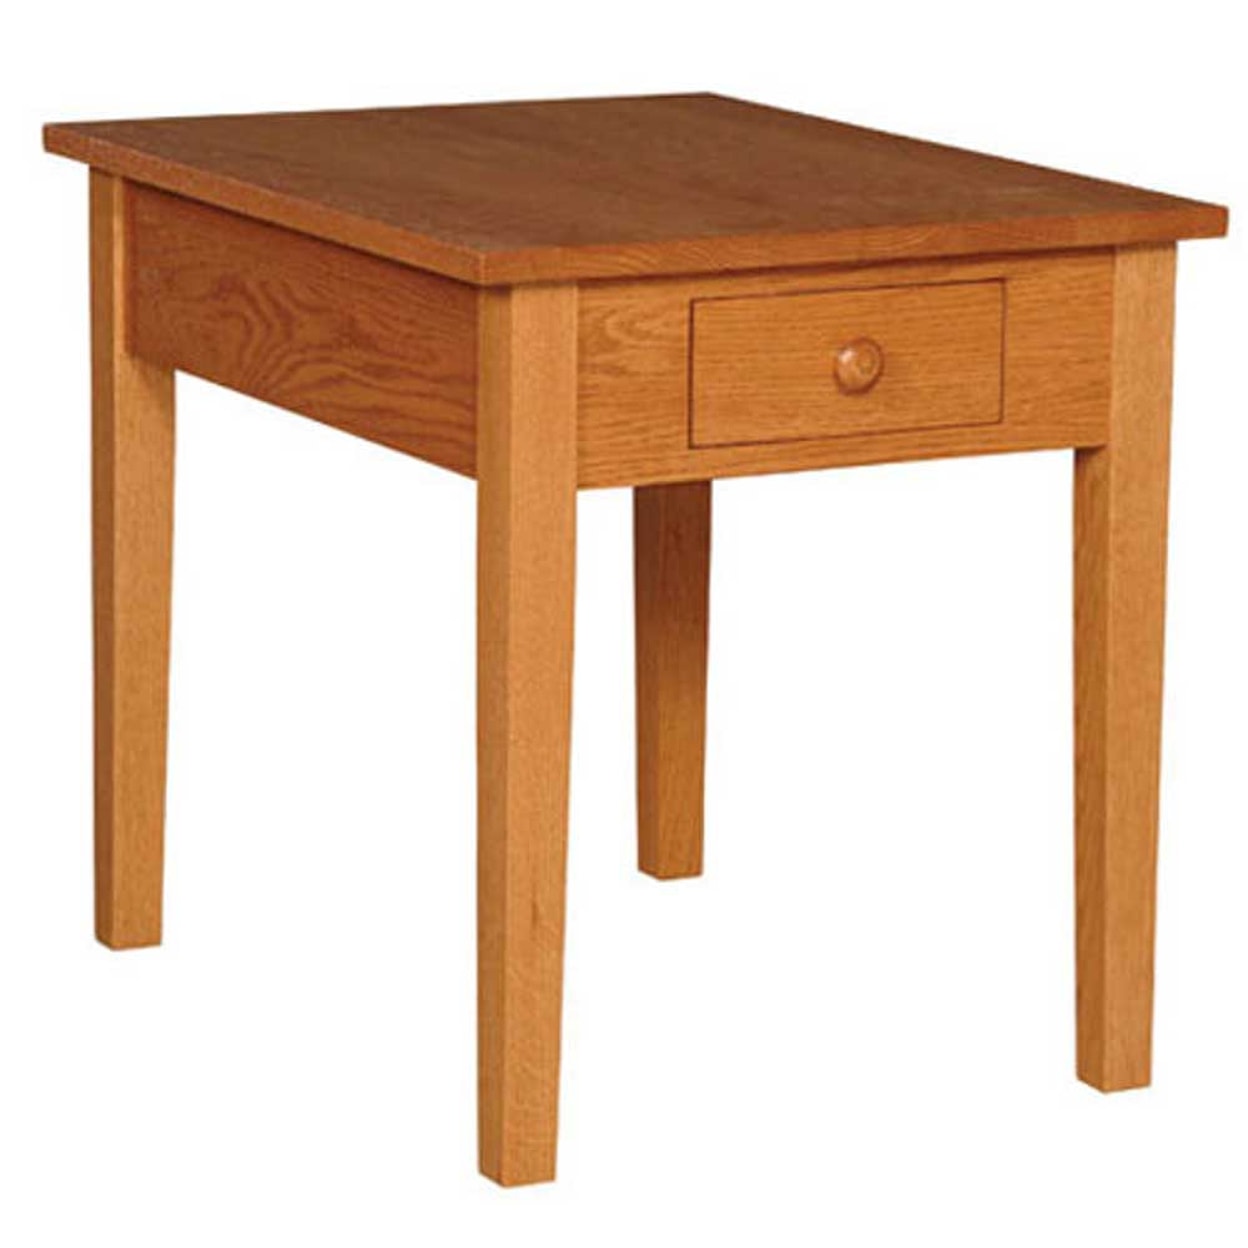 Simply Amish Shaker Amish Drawer End Table